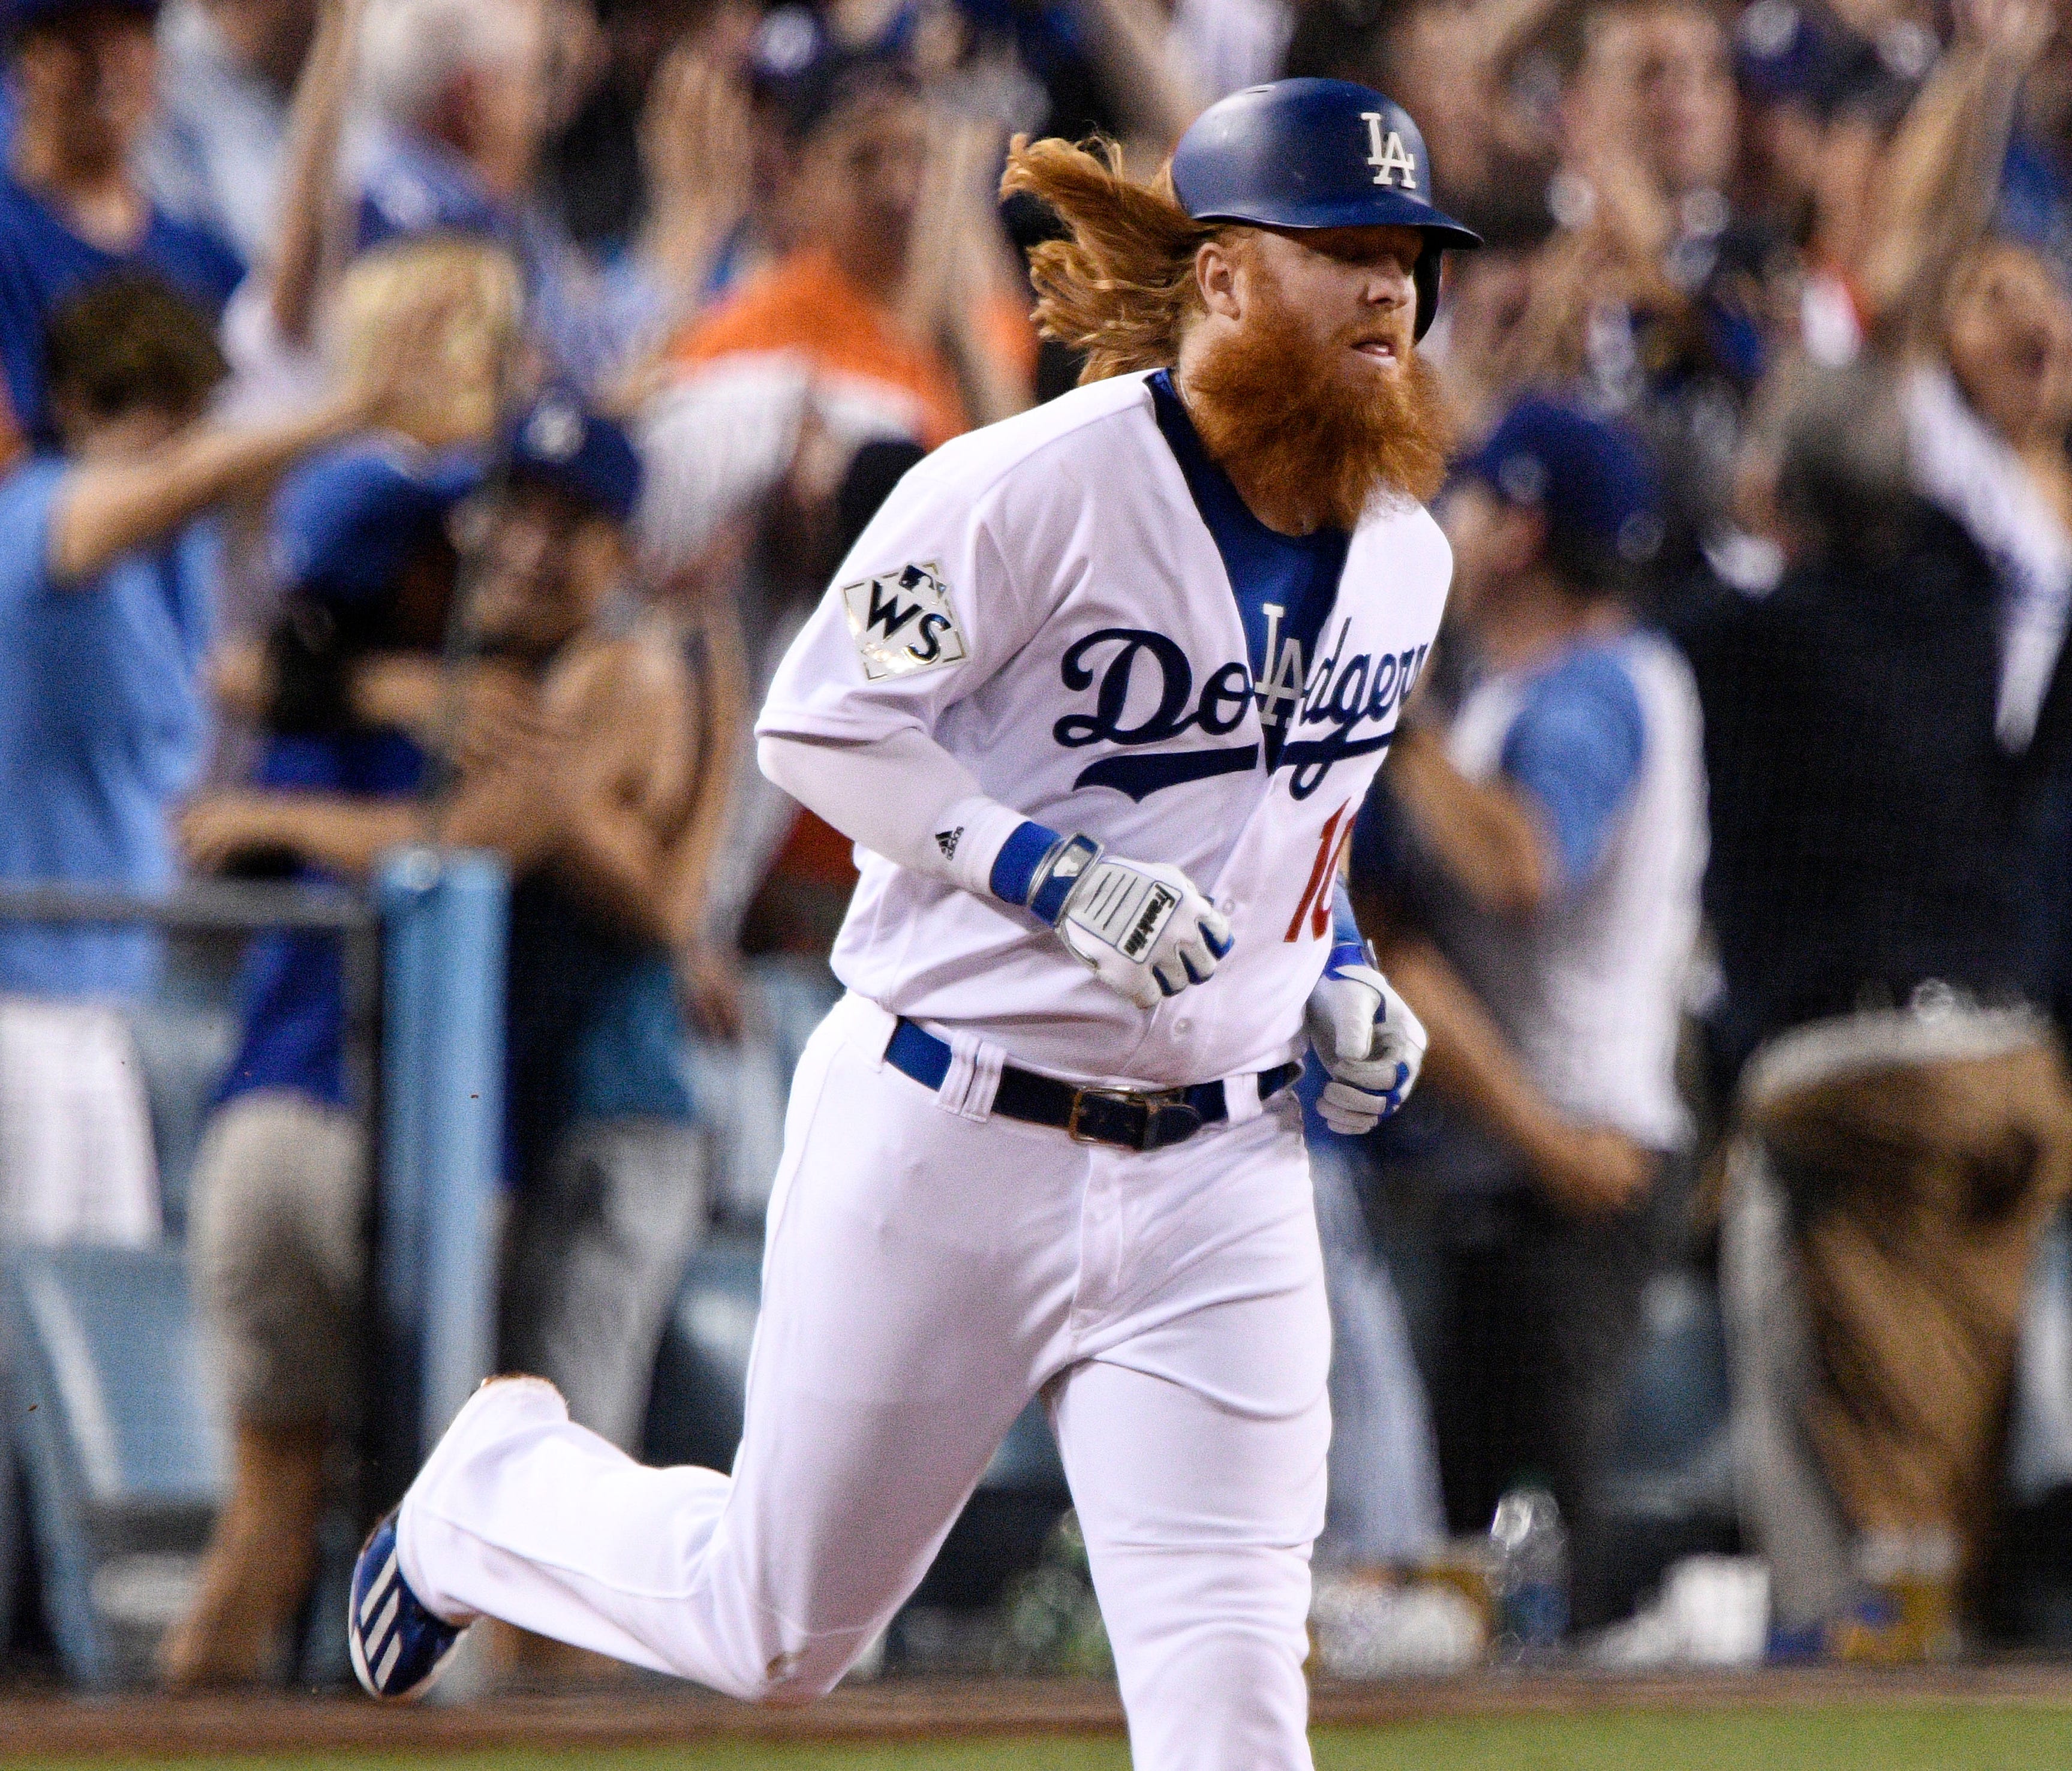 Justin Turner rounds the bases after a two-run homer in the sixth inning.